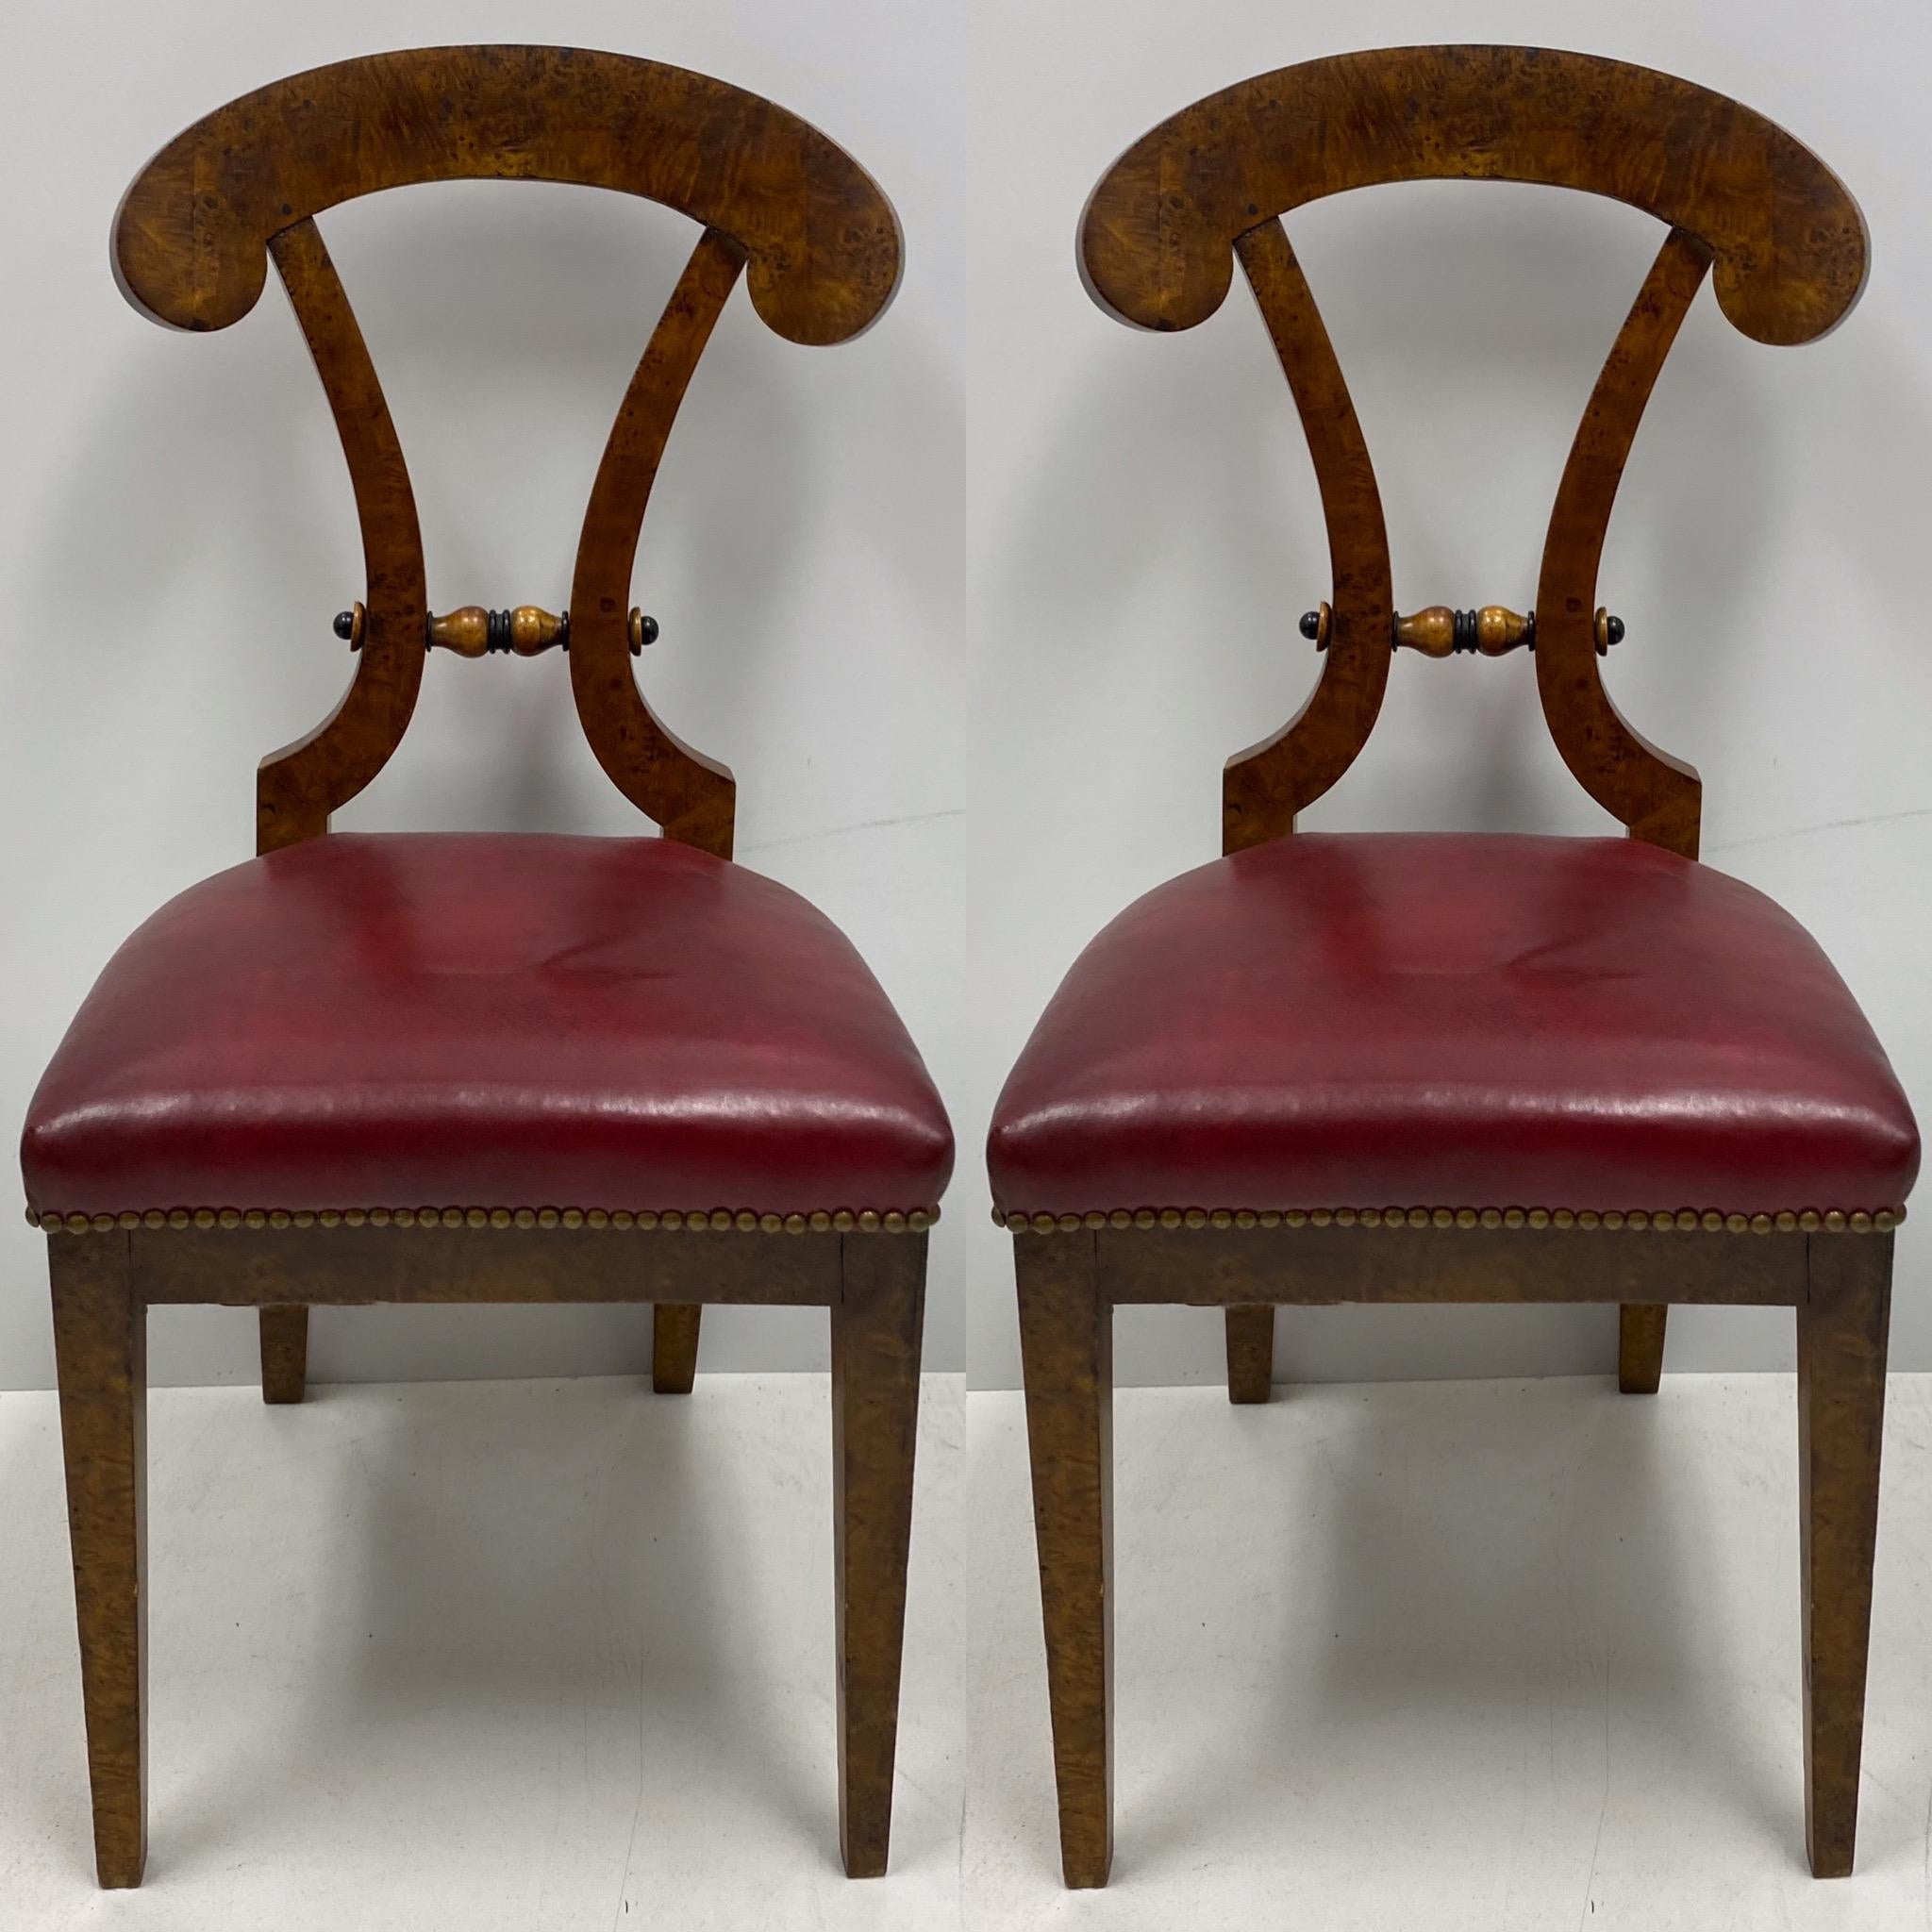  These handsome Art Deco Biedermeier chairs have carved burl wood frames and original deep red leather seats. They date to the earlier part of the 20th century, and they are in original condition.